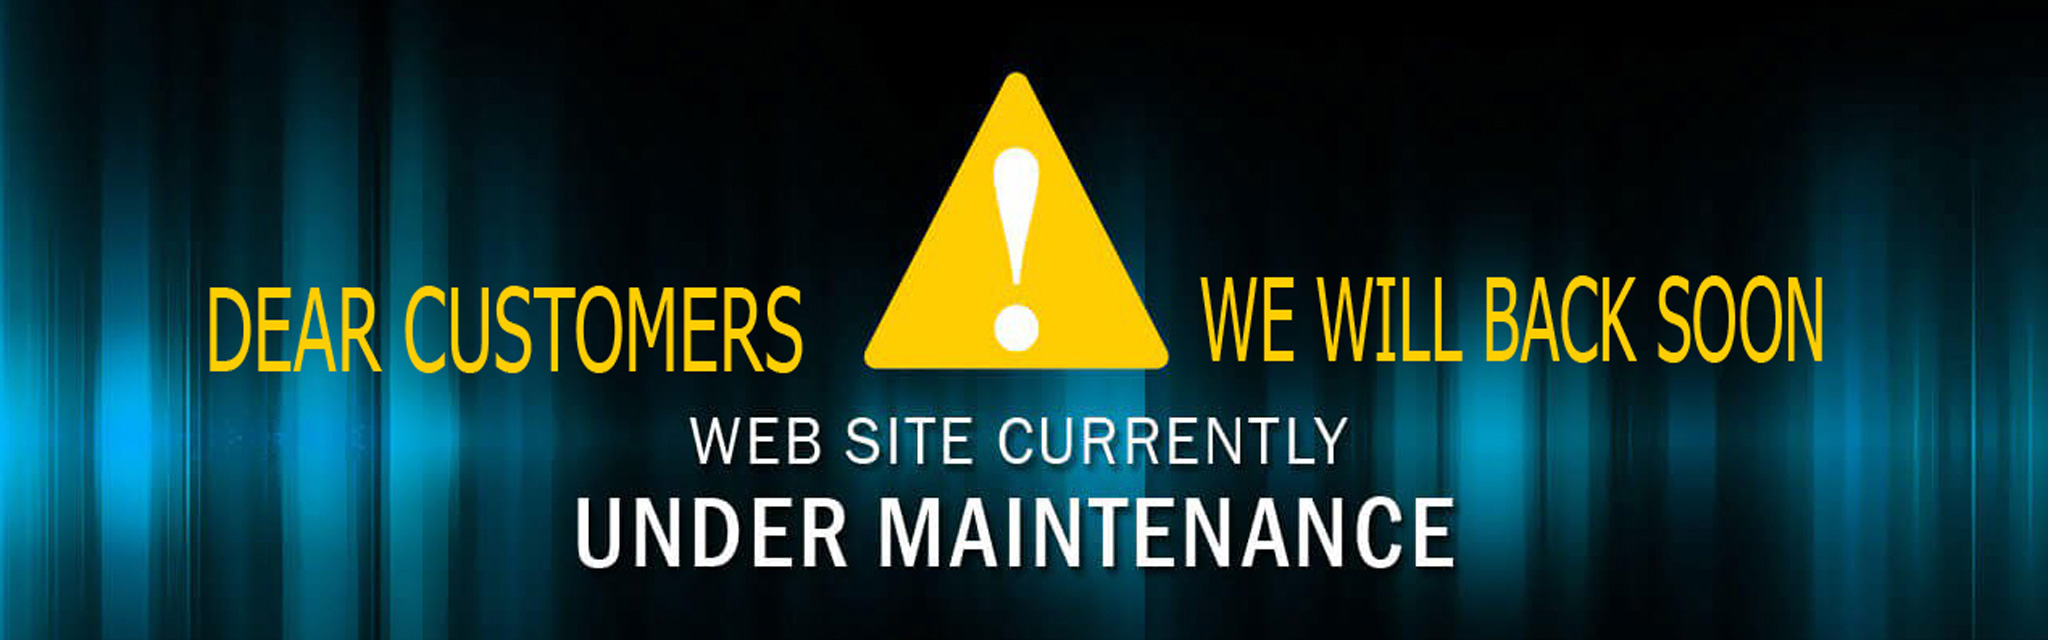  WEBSITE CLOSED DUE TO UNDER MAINTENANCE!!! WE WILL BACK SOON...